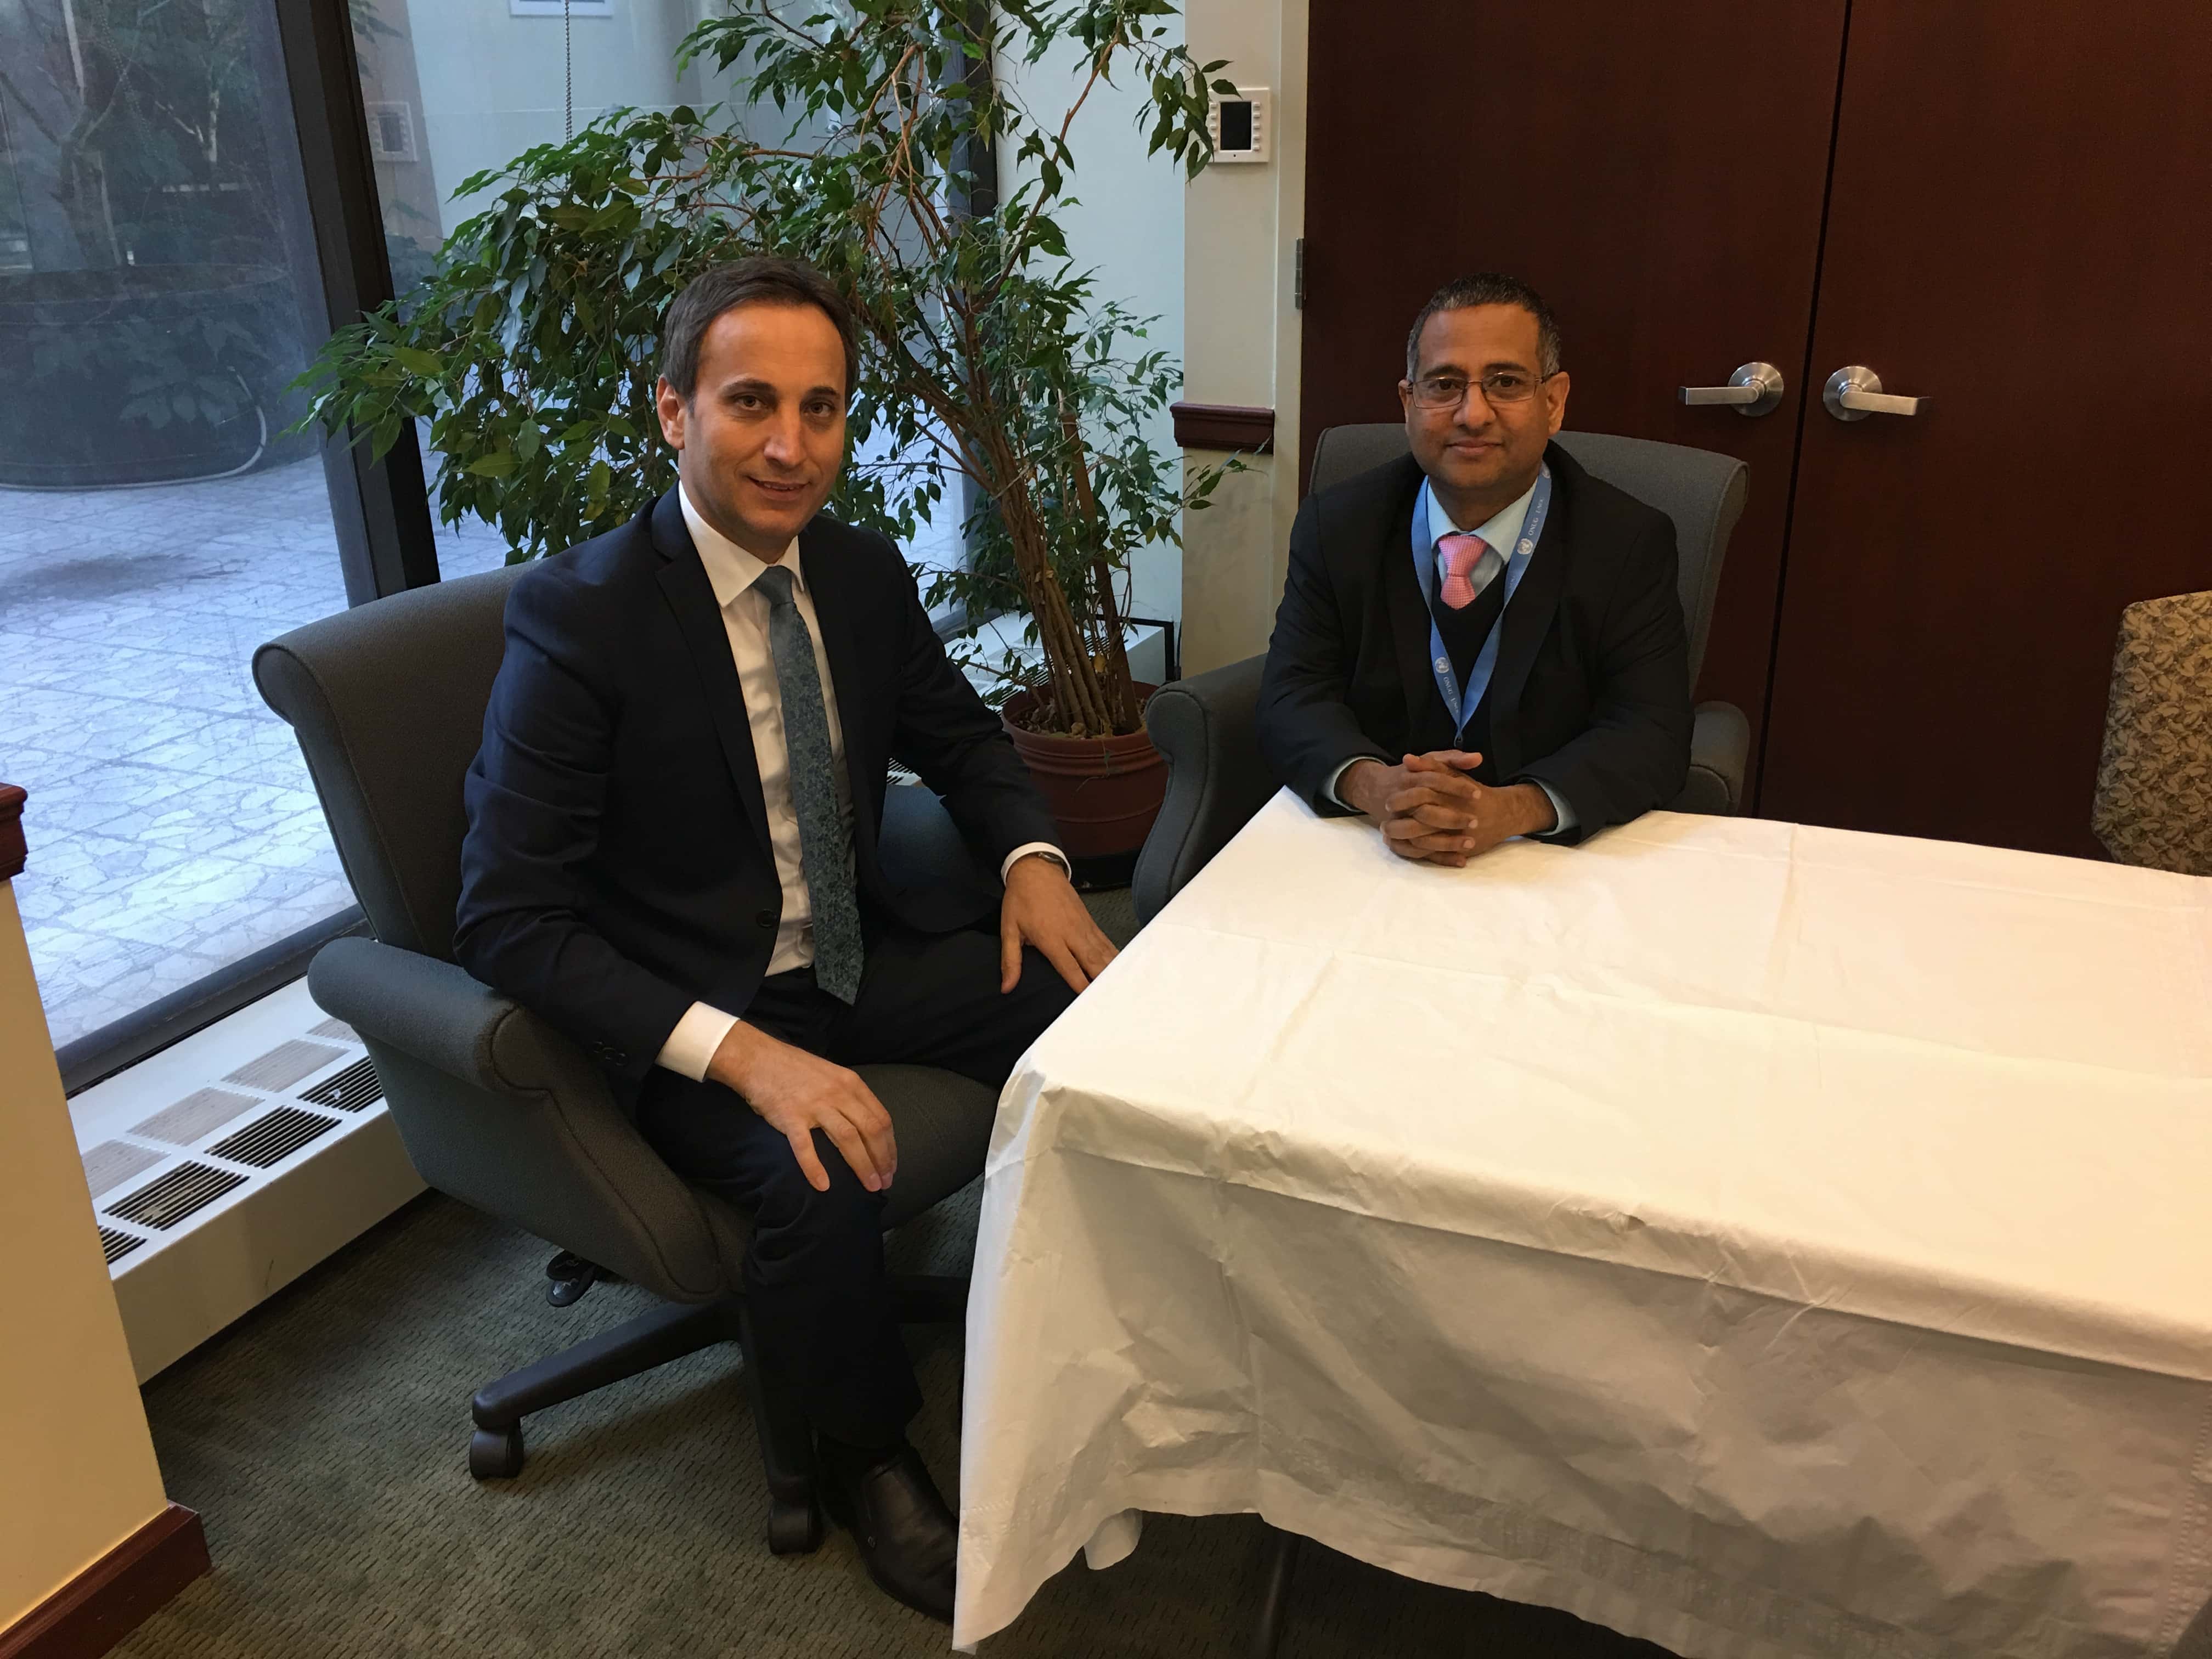 Seventh-day Adventist United Nations Liaison, Dr. Nelu Burcea (left) met with newly appointed U.N. Special Rapporteur for freedom of religion or belief, Dr. Ahmed Shaheed (right) to share the Adventist Church’s vision for defending freedom of religion. Photo credit: United Nations